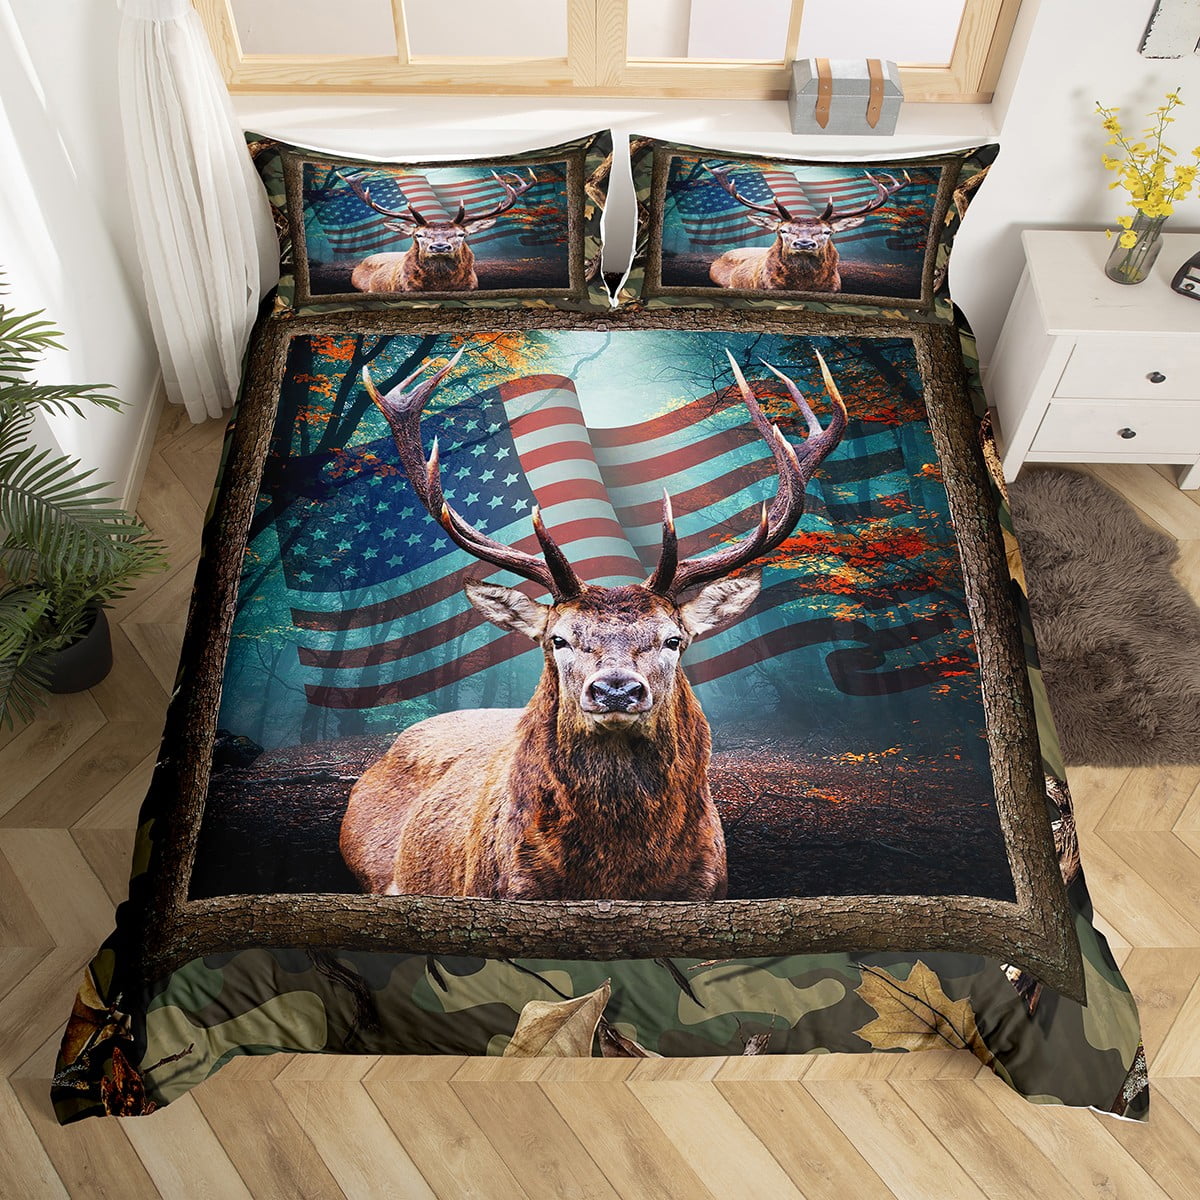 Castle Fairy Deer Hunt Duvet Cover Set Full Size Rustic Farmhouse Bedding  Set 3pcs Brown Dead Branches Camo Comforter Cover for Kids Teens Adults  Room